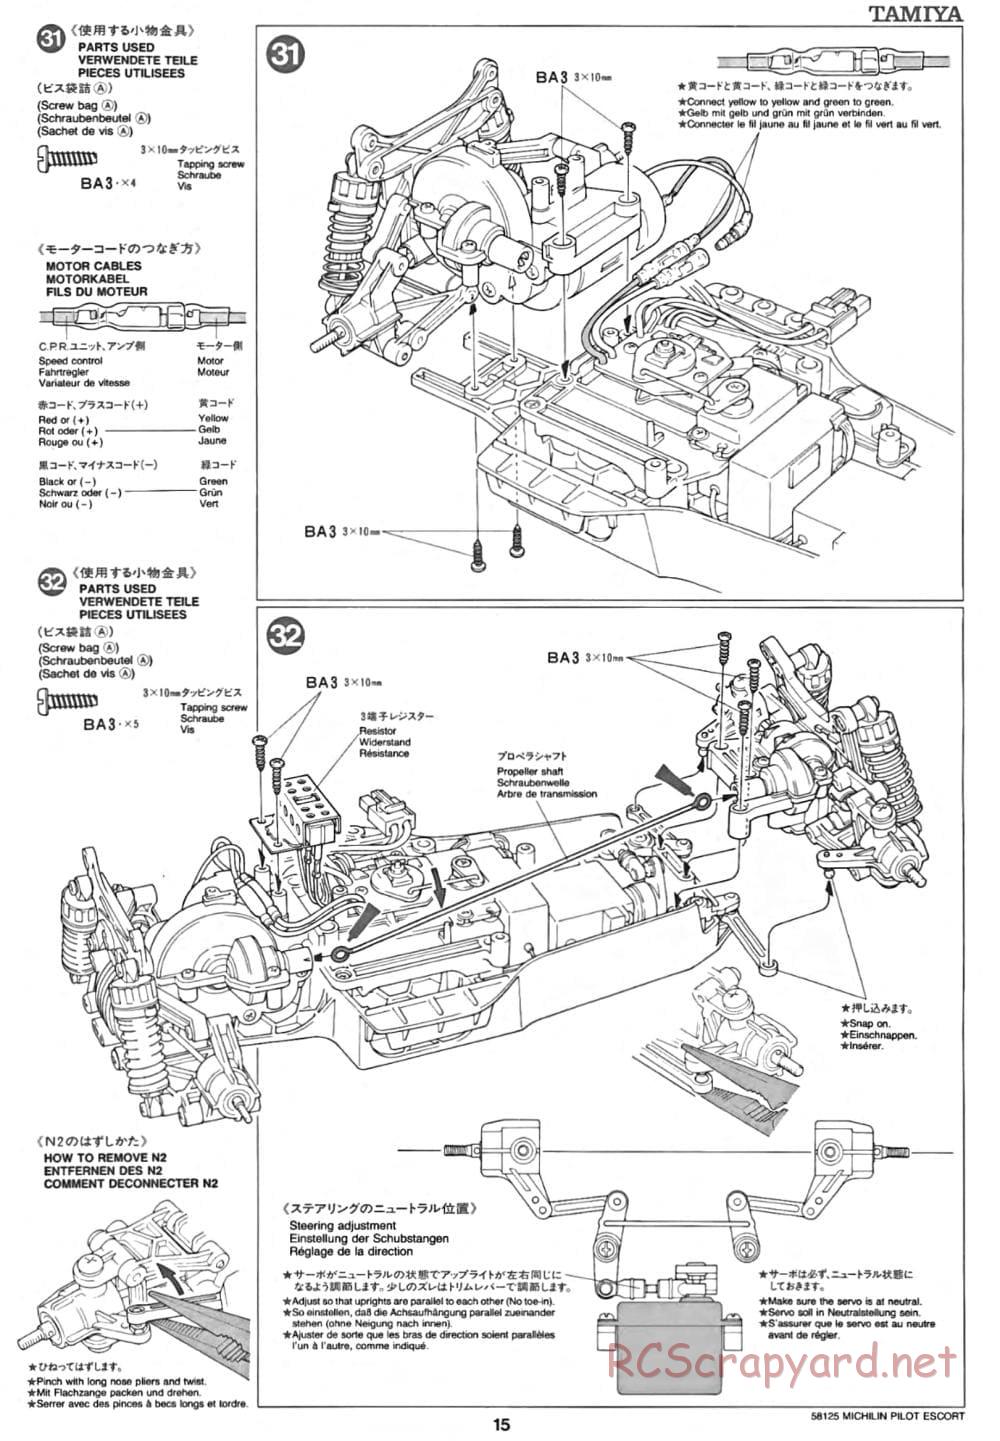 Tamiya - Michelin Pilot Ford Escort RS Cosworth - TA-01 Chassis - Manual - Page 15